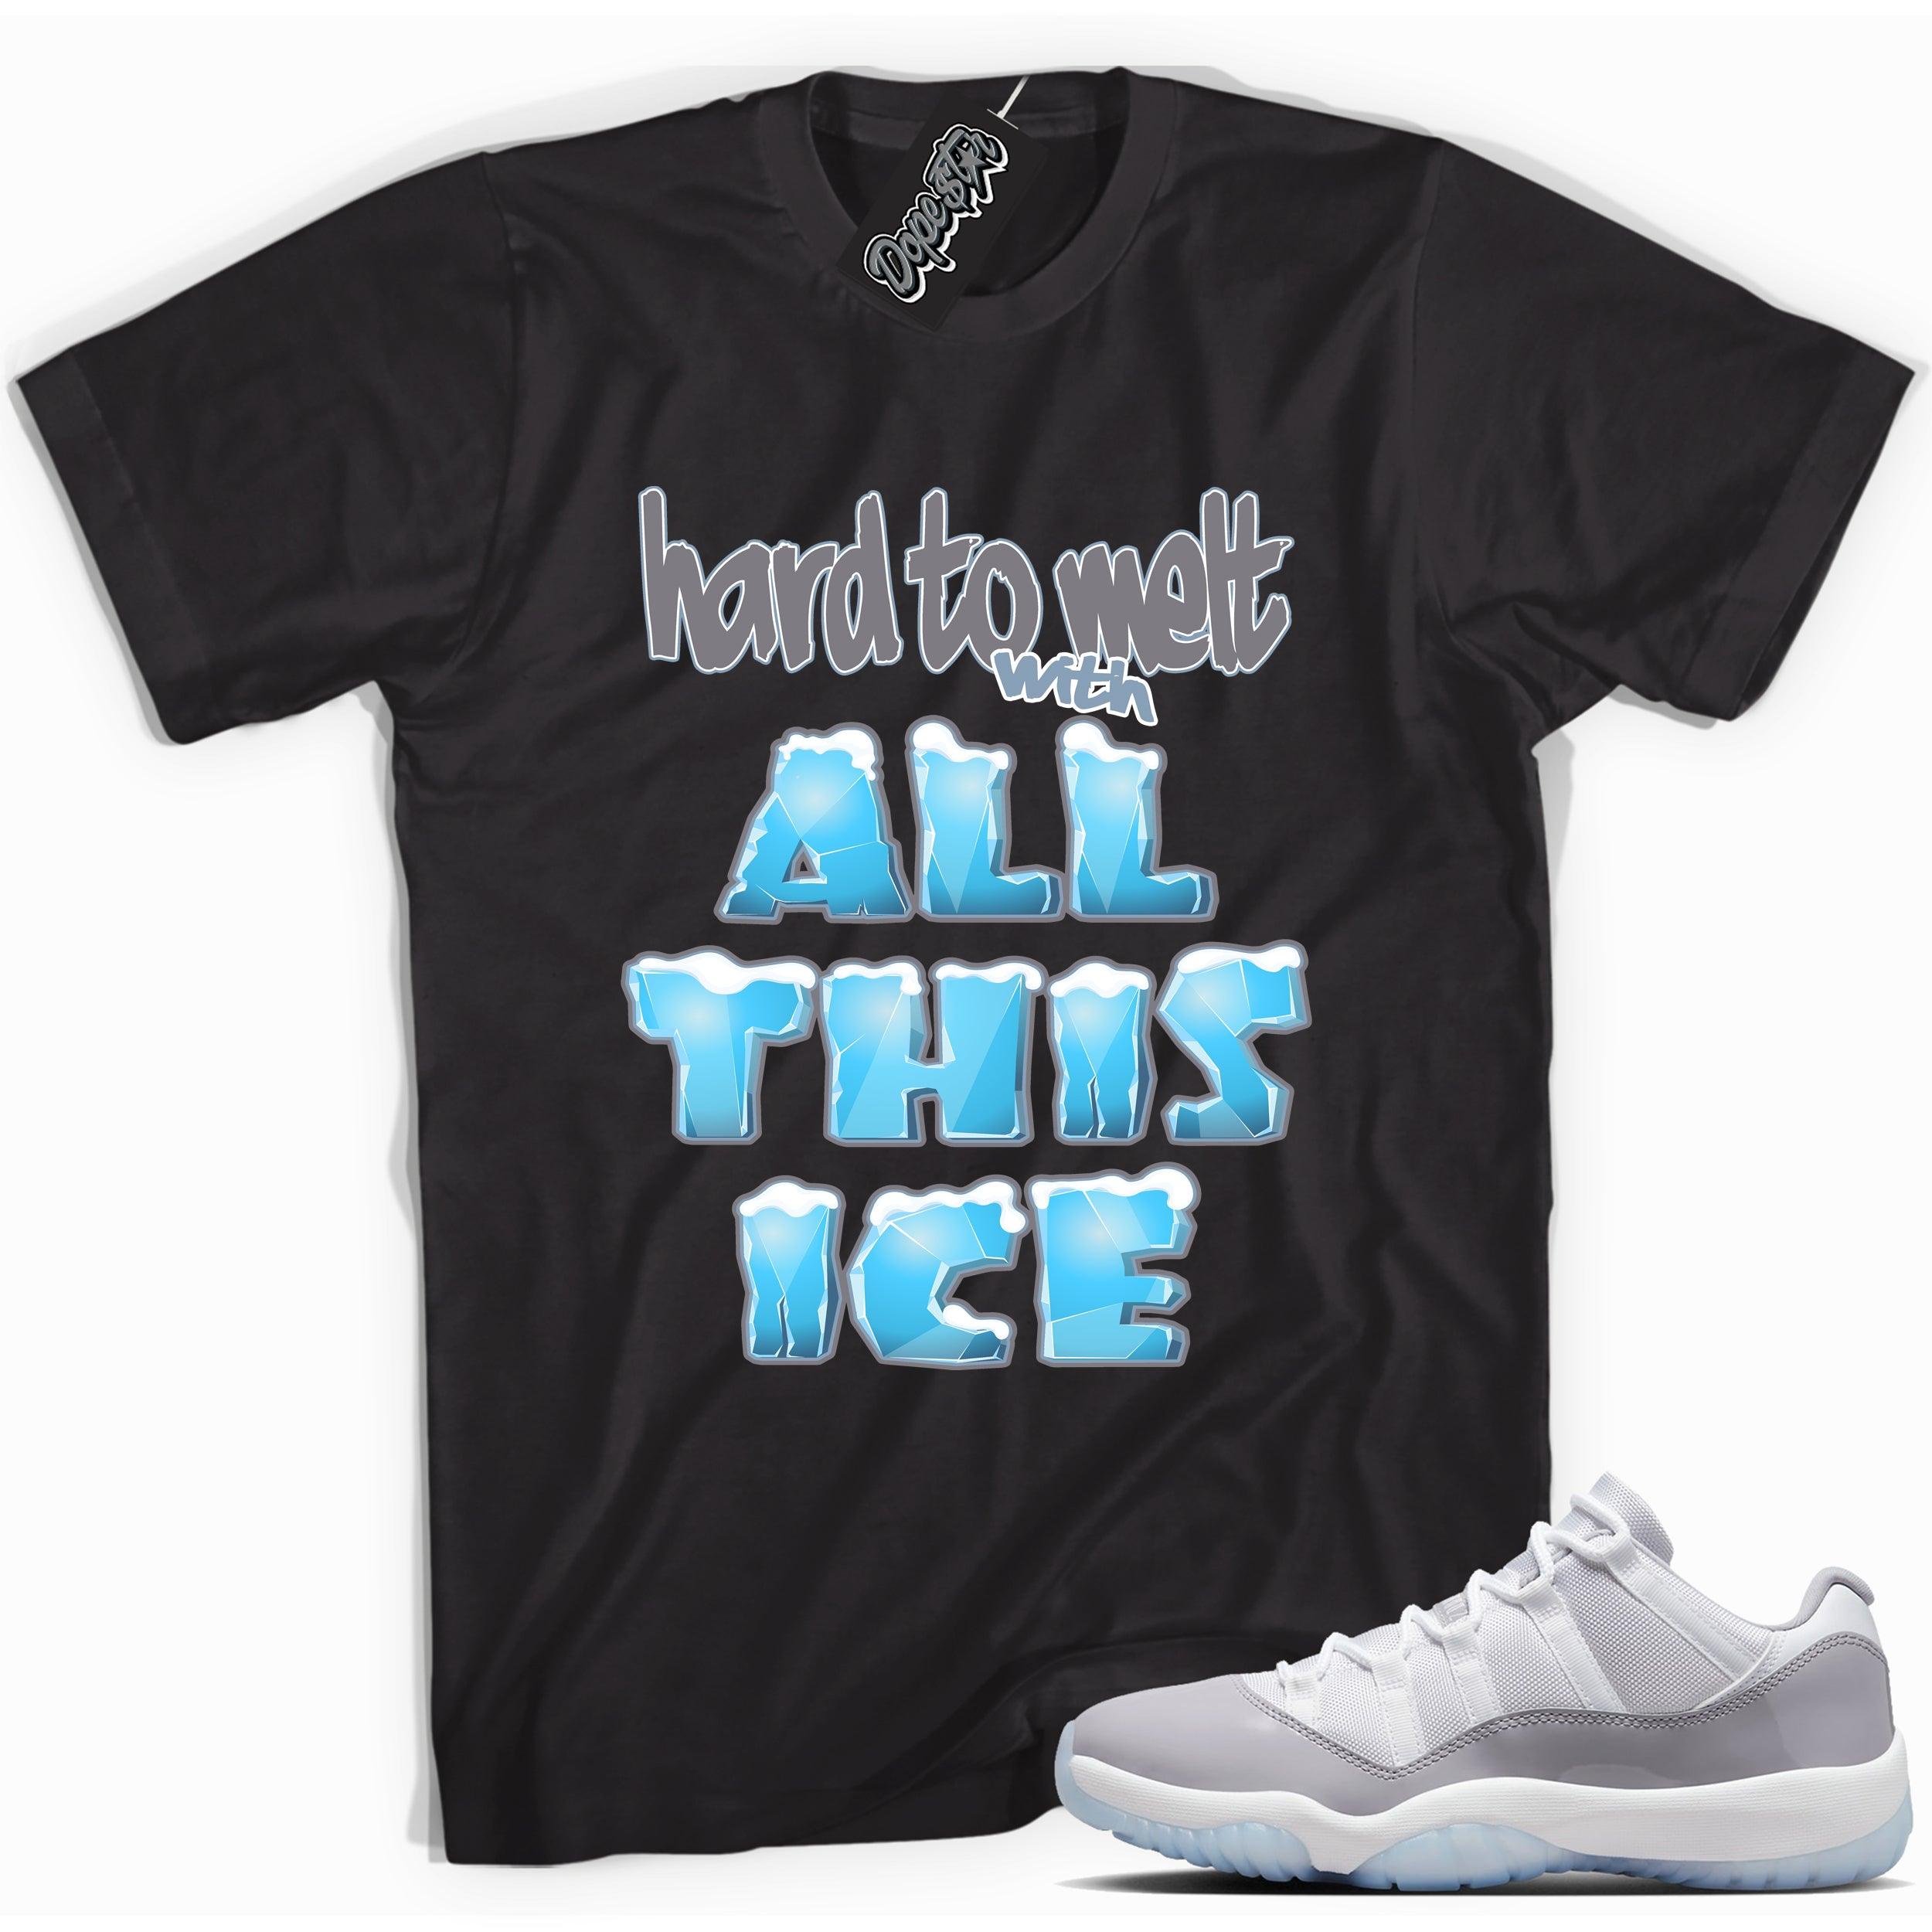 Cool Black graphic tee with “ All This Ice ” print, that perfectly matches Air Jordan 11 Retro Low Cement Grey sneakers 